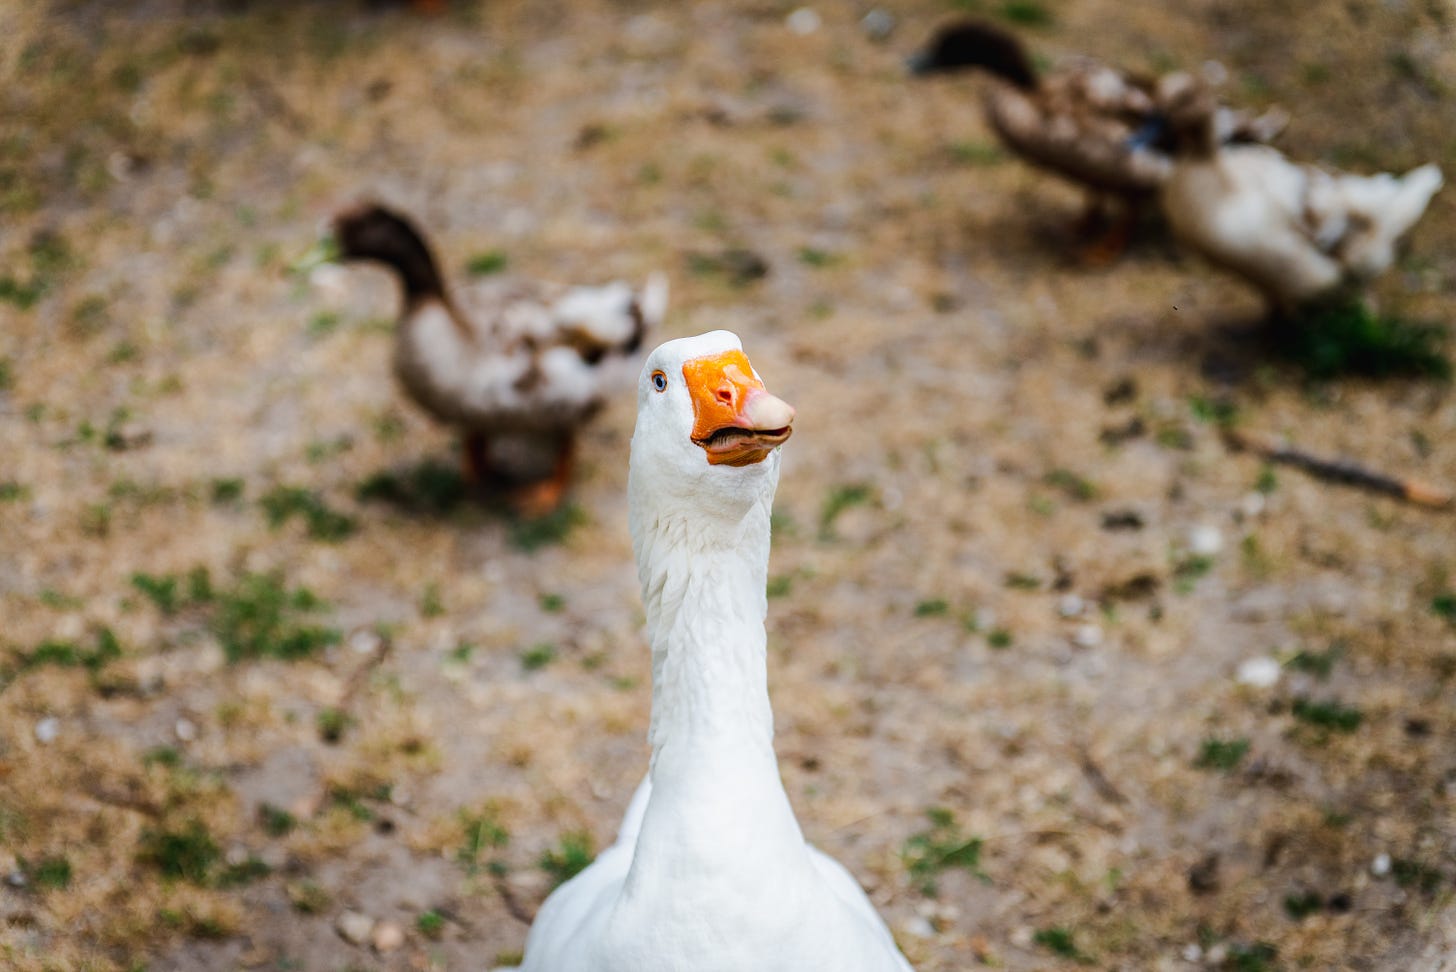 A white goose with an orange beak appearing to have an expression like Kermit the Frog when he gets exasperated